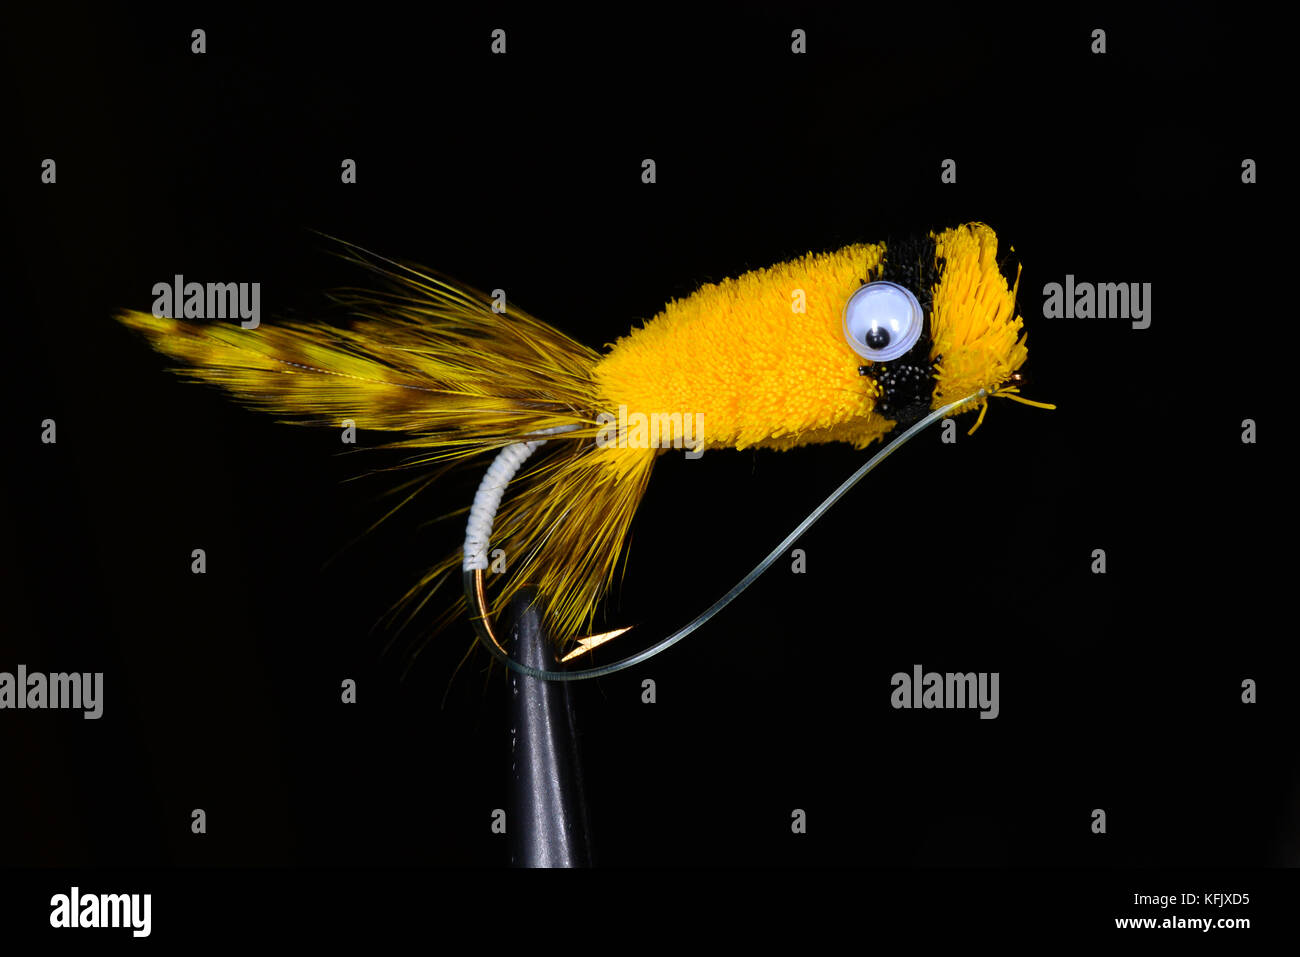 Yellow deer hair popper used for fly fishing for bass. Stock Photo